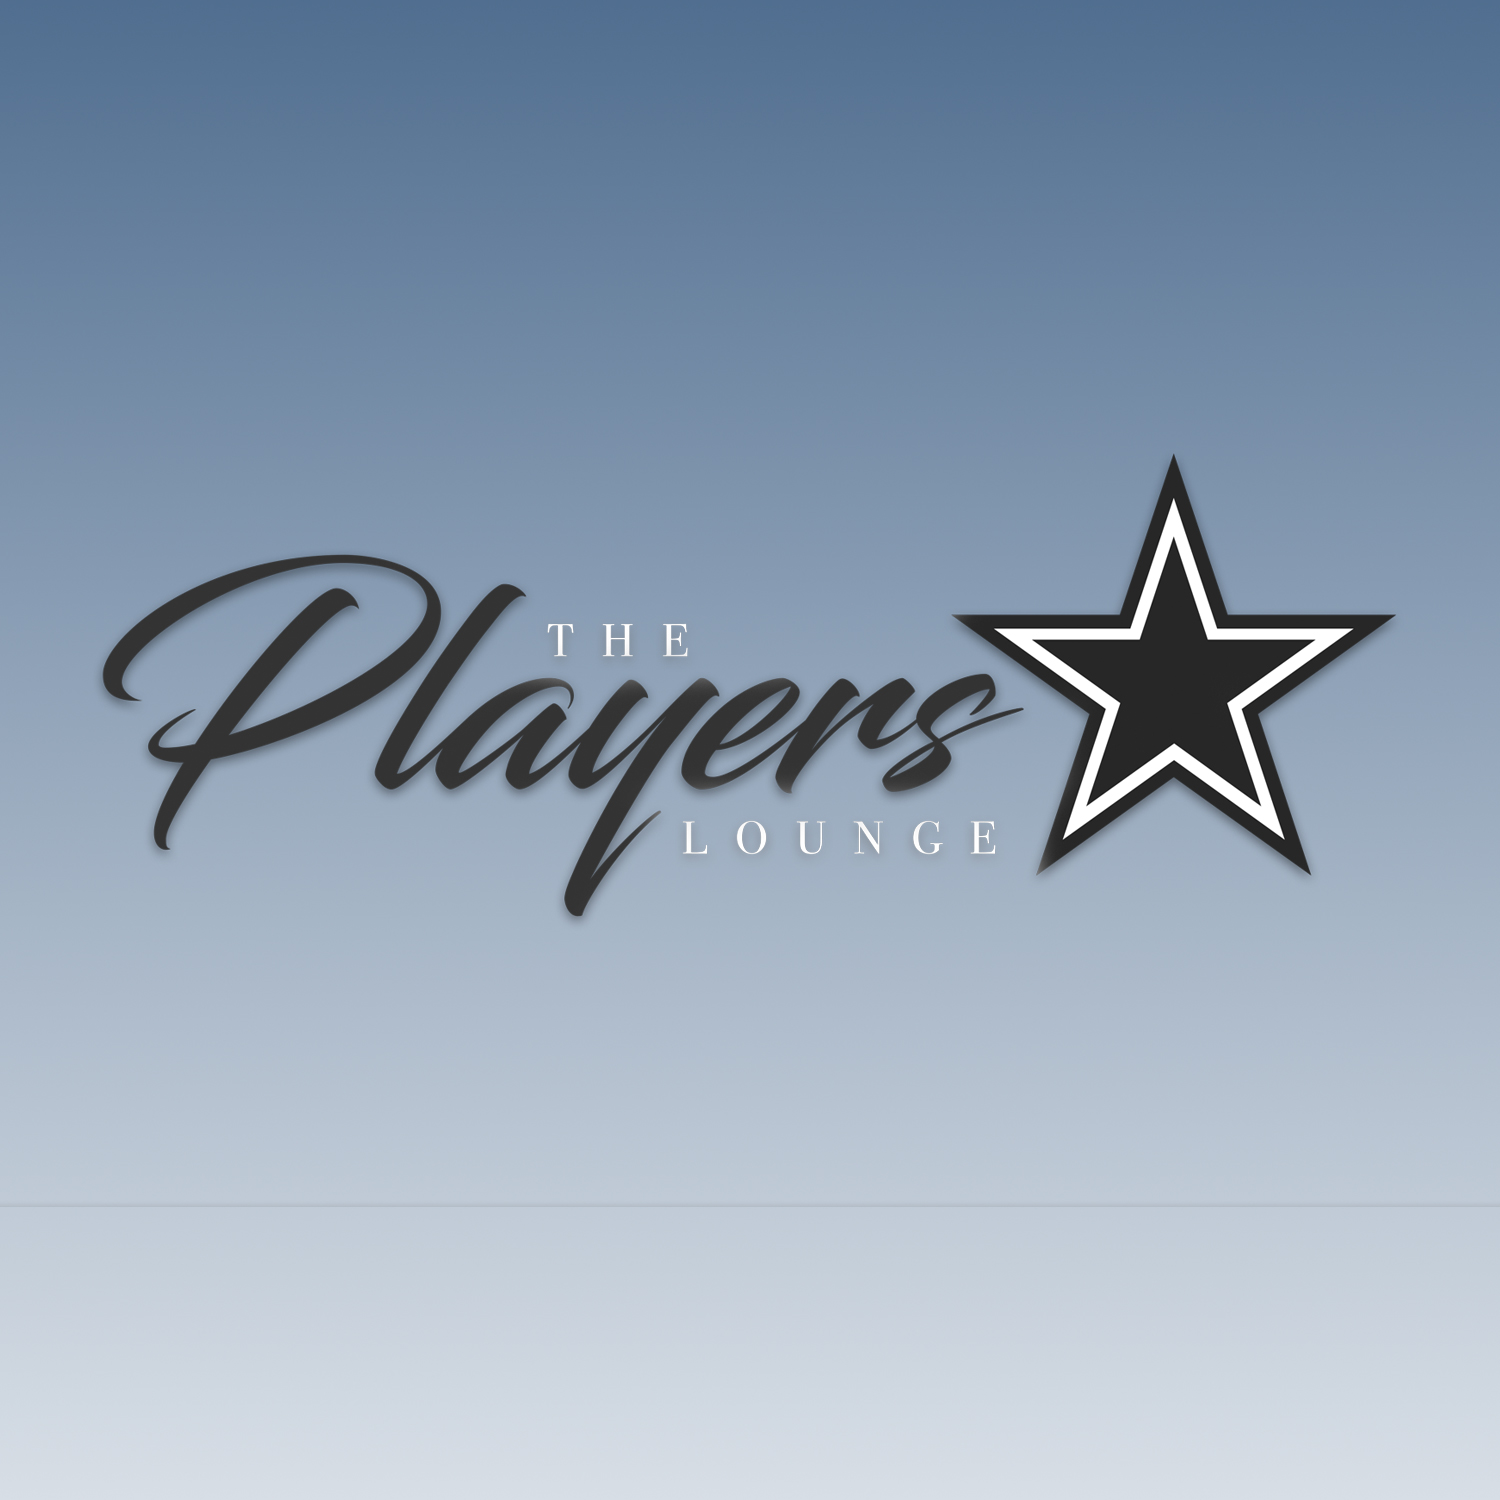 Player’s Lounge: Lunch is For Closers